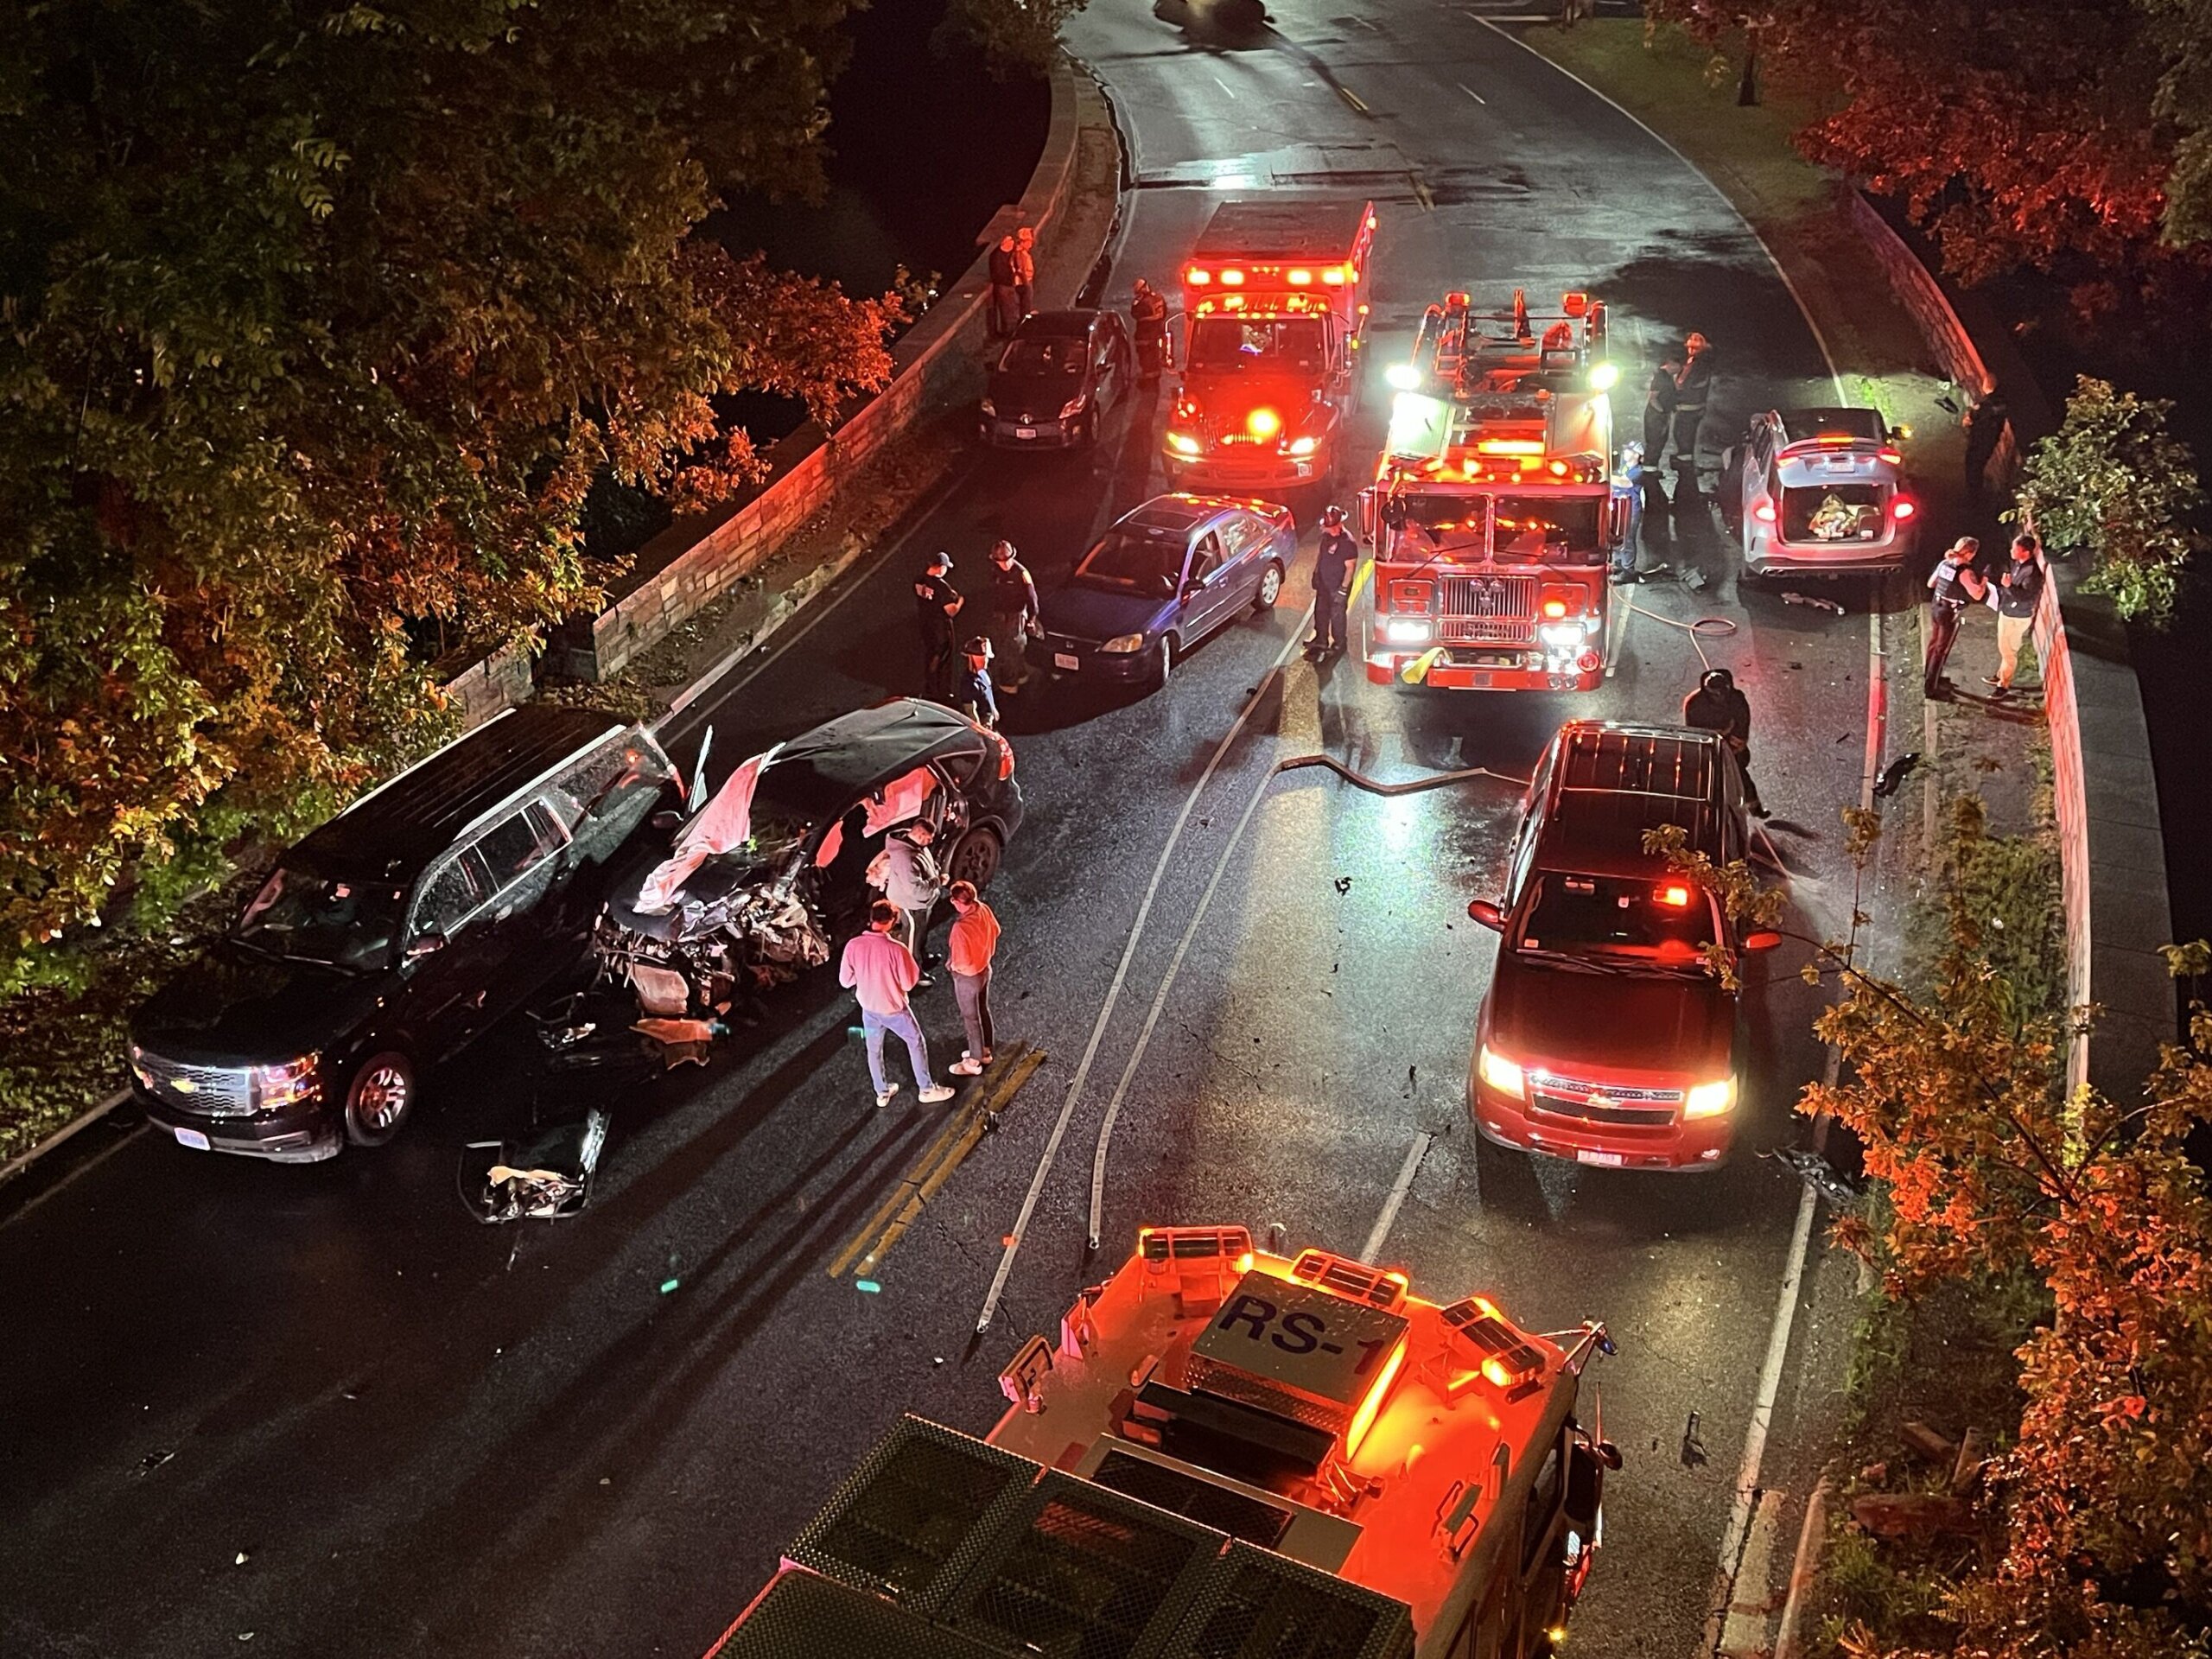 An evening crash shutdown D.C.'s Rock Creek Parkway in both directions Saturday. U.S. Park Police and DC EMS told WTOP it happened at about 8:30 p.m.